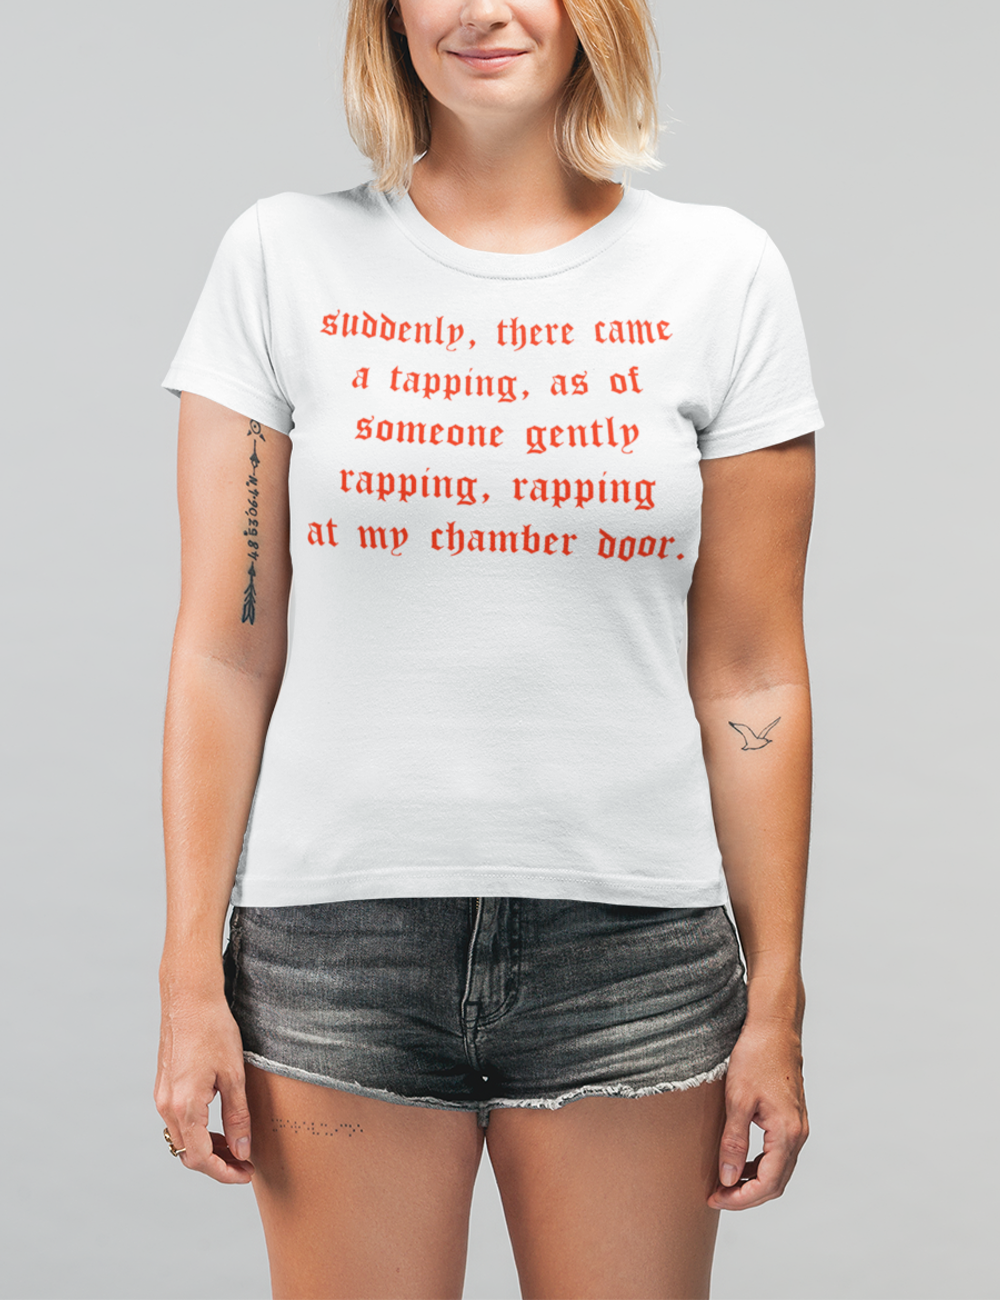 Suddenly There Came A Tapping | Women's Style T-Shirt OniTakai